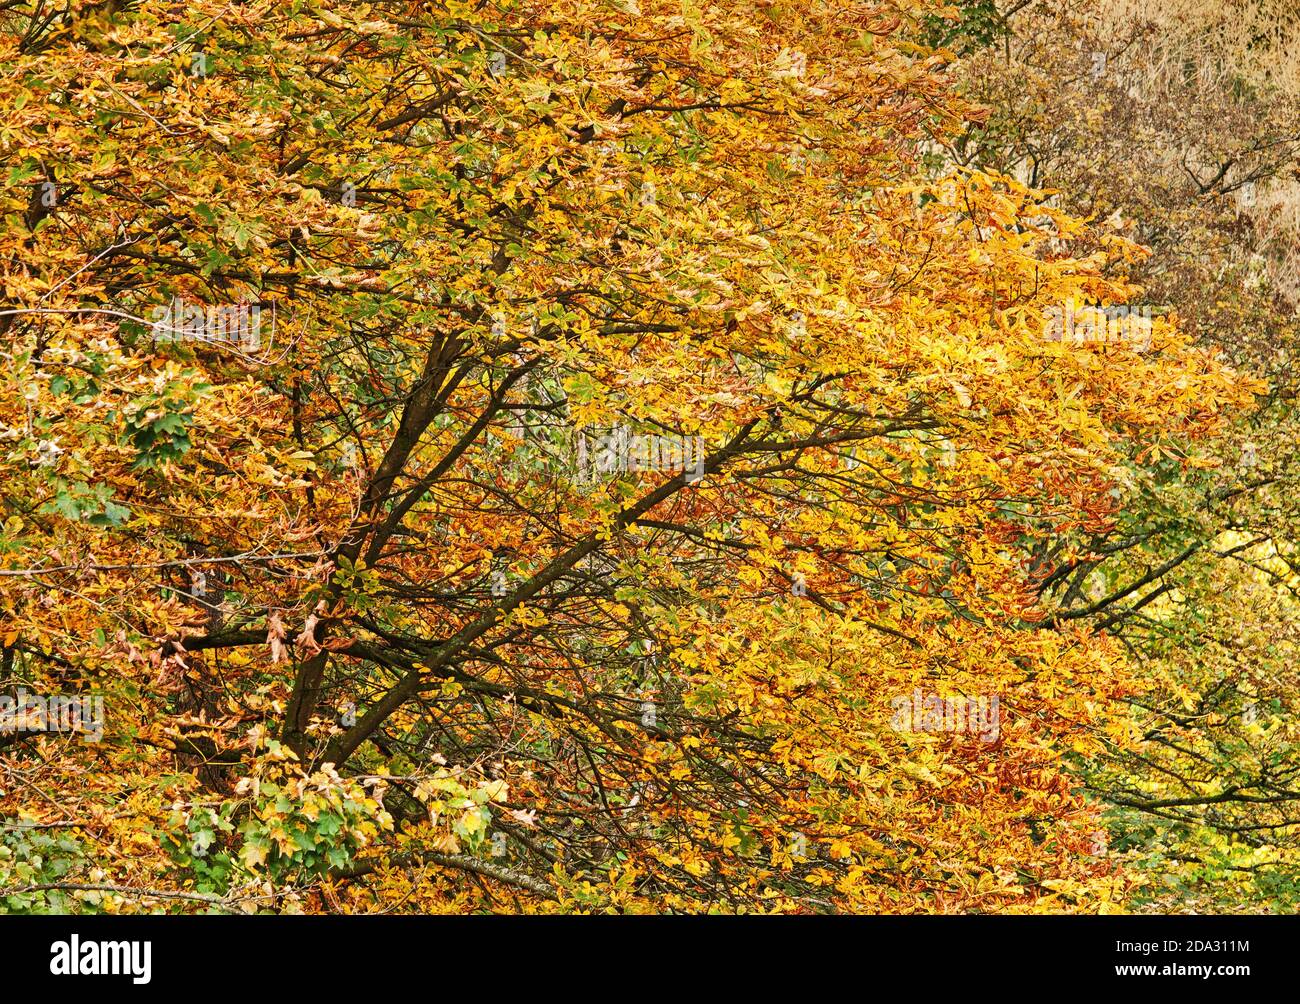 An abstract view of a tree in early autumn, with golden leaves and a branch leaning in to the picture, suggesting leaning in to autumn Stock Photo